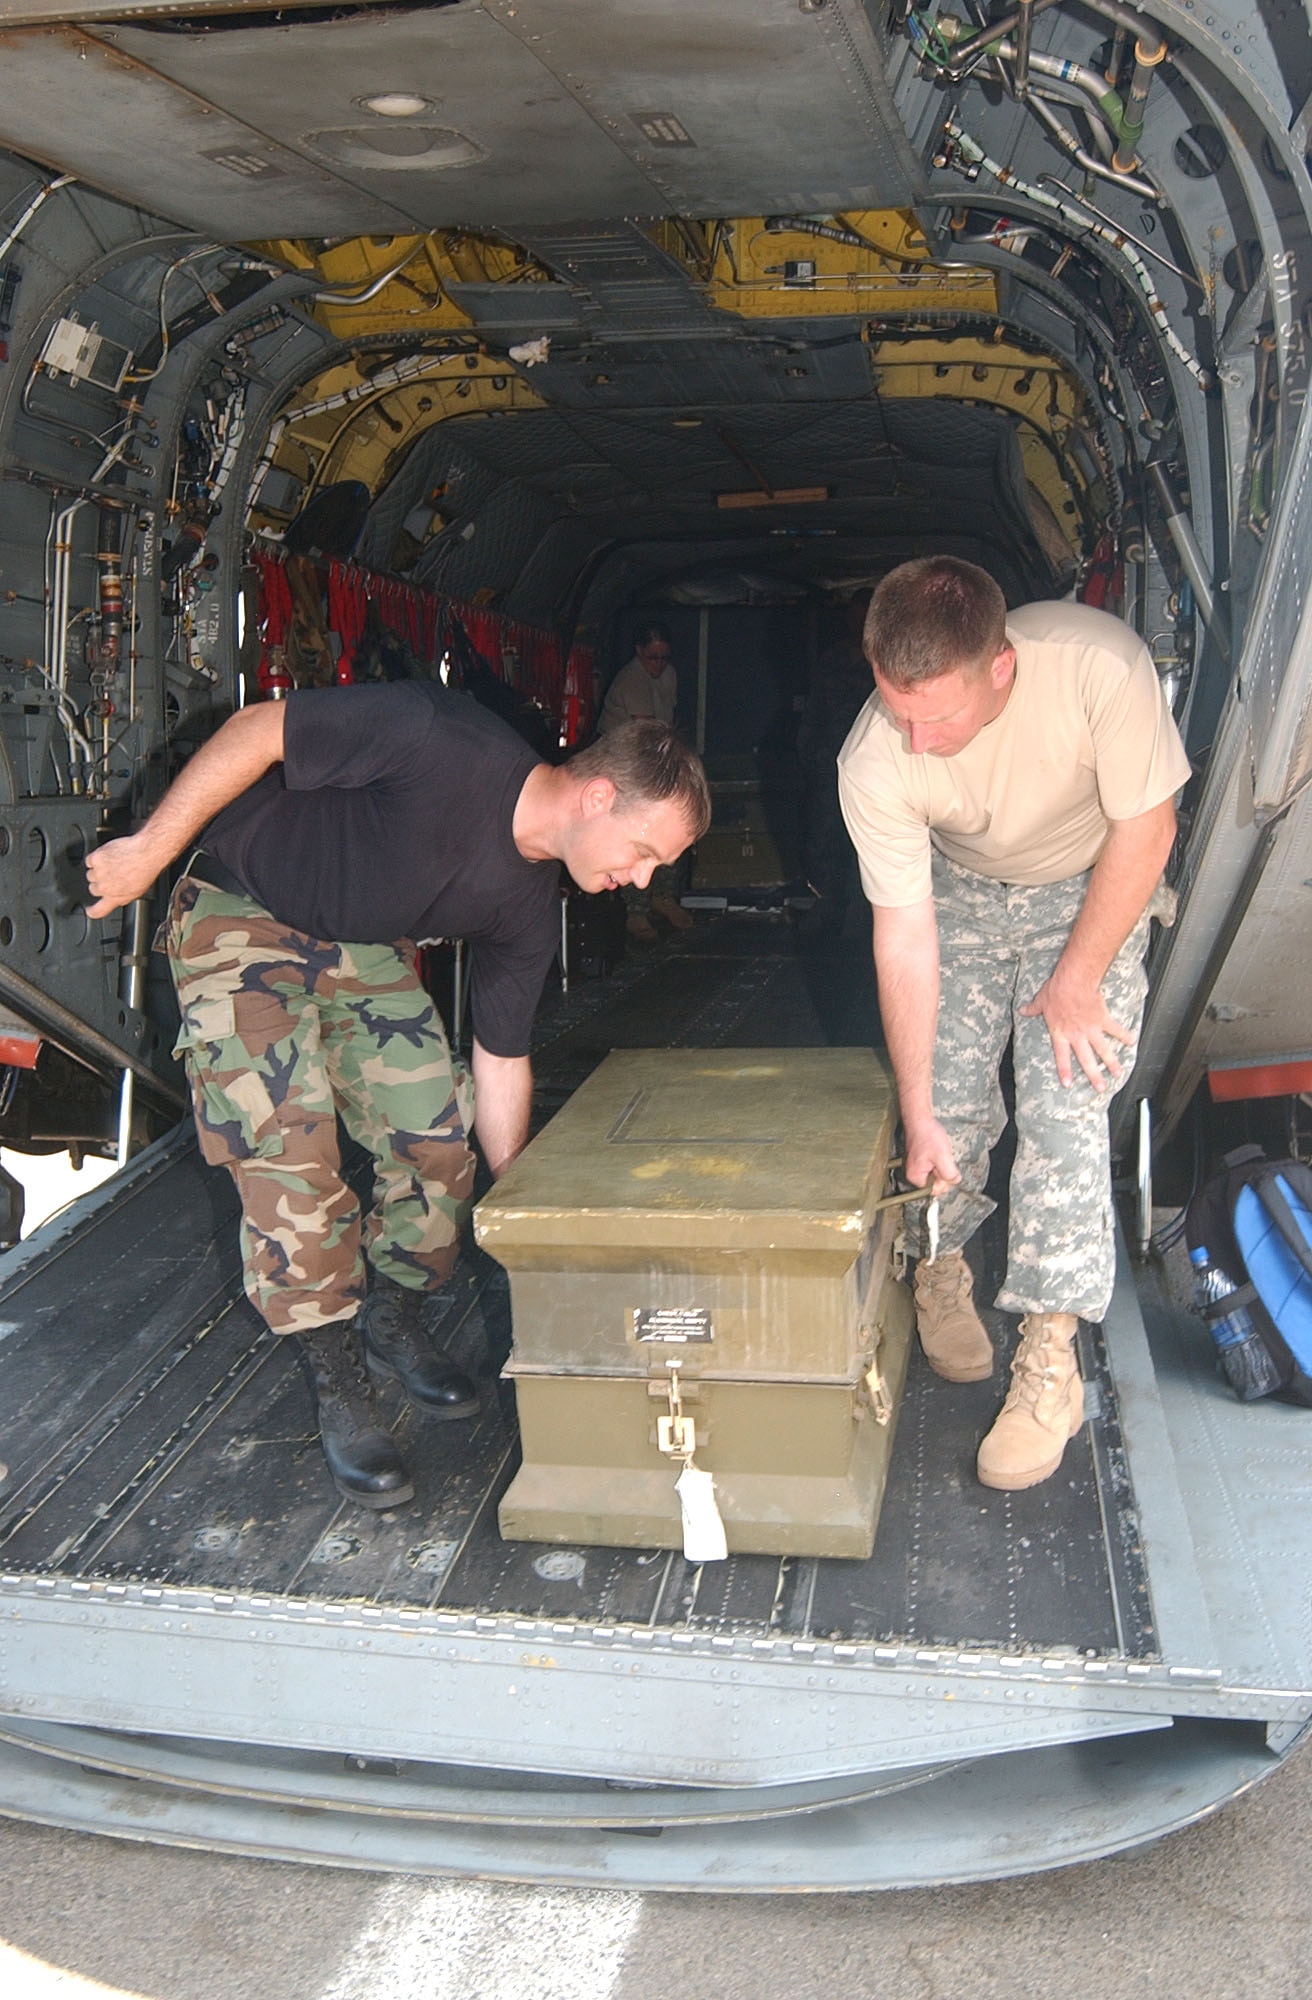 Staff Sgt. Robert Jessop and Army Staff Sgt. William Grieshaber unload a trunk filled with medical equipment which was donated to a hospital in Leon, Nicaragua, Sept. 13. Joint Task Force-Bravo members at Soto Cano Air Base, Honduras, donated more than $185,000 worth of medical equipment and supplies to a hospital in Leon where 45 people died and hundreds more were being treated for alcohol poisoning. (U.S. Air Force photo/Capt. Alysia Harvey) 
